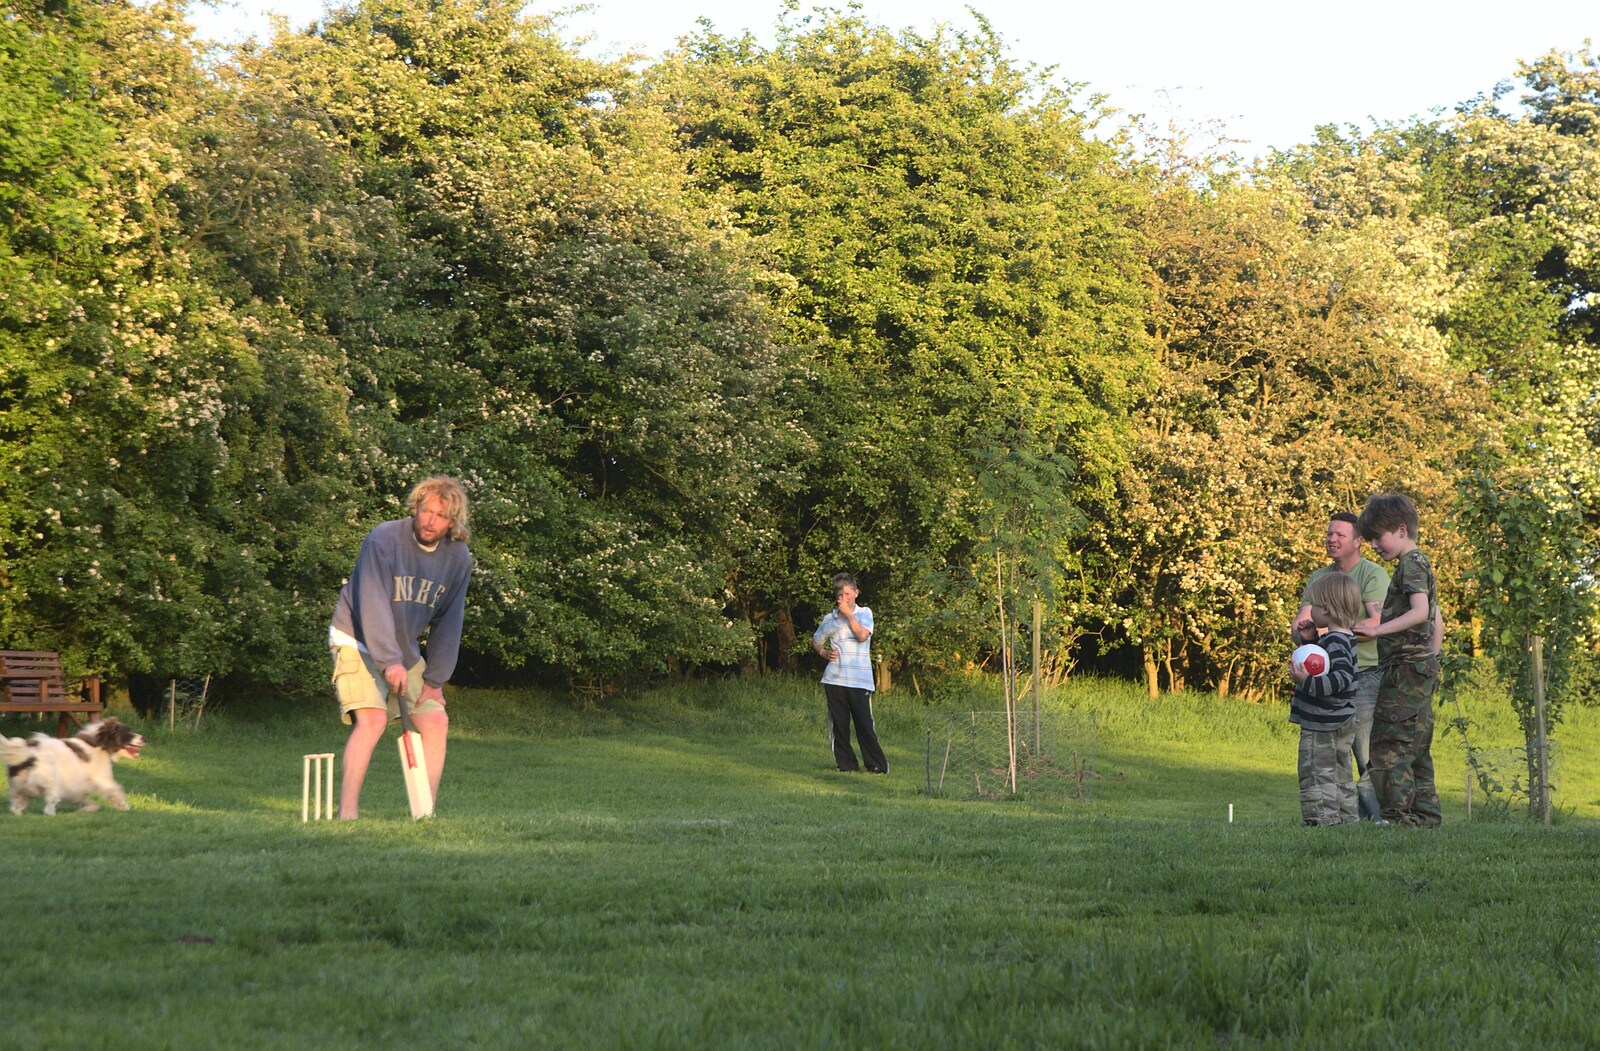 Wavy's in bat for a game of cricket from Martina's Birthday Barbeque, Thrandeston, Suffolk - 23rd May 2009